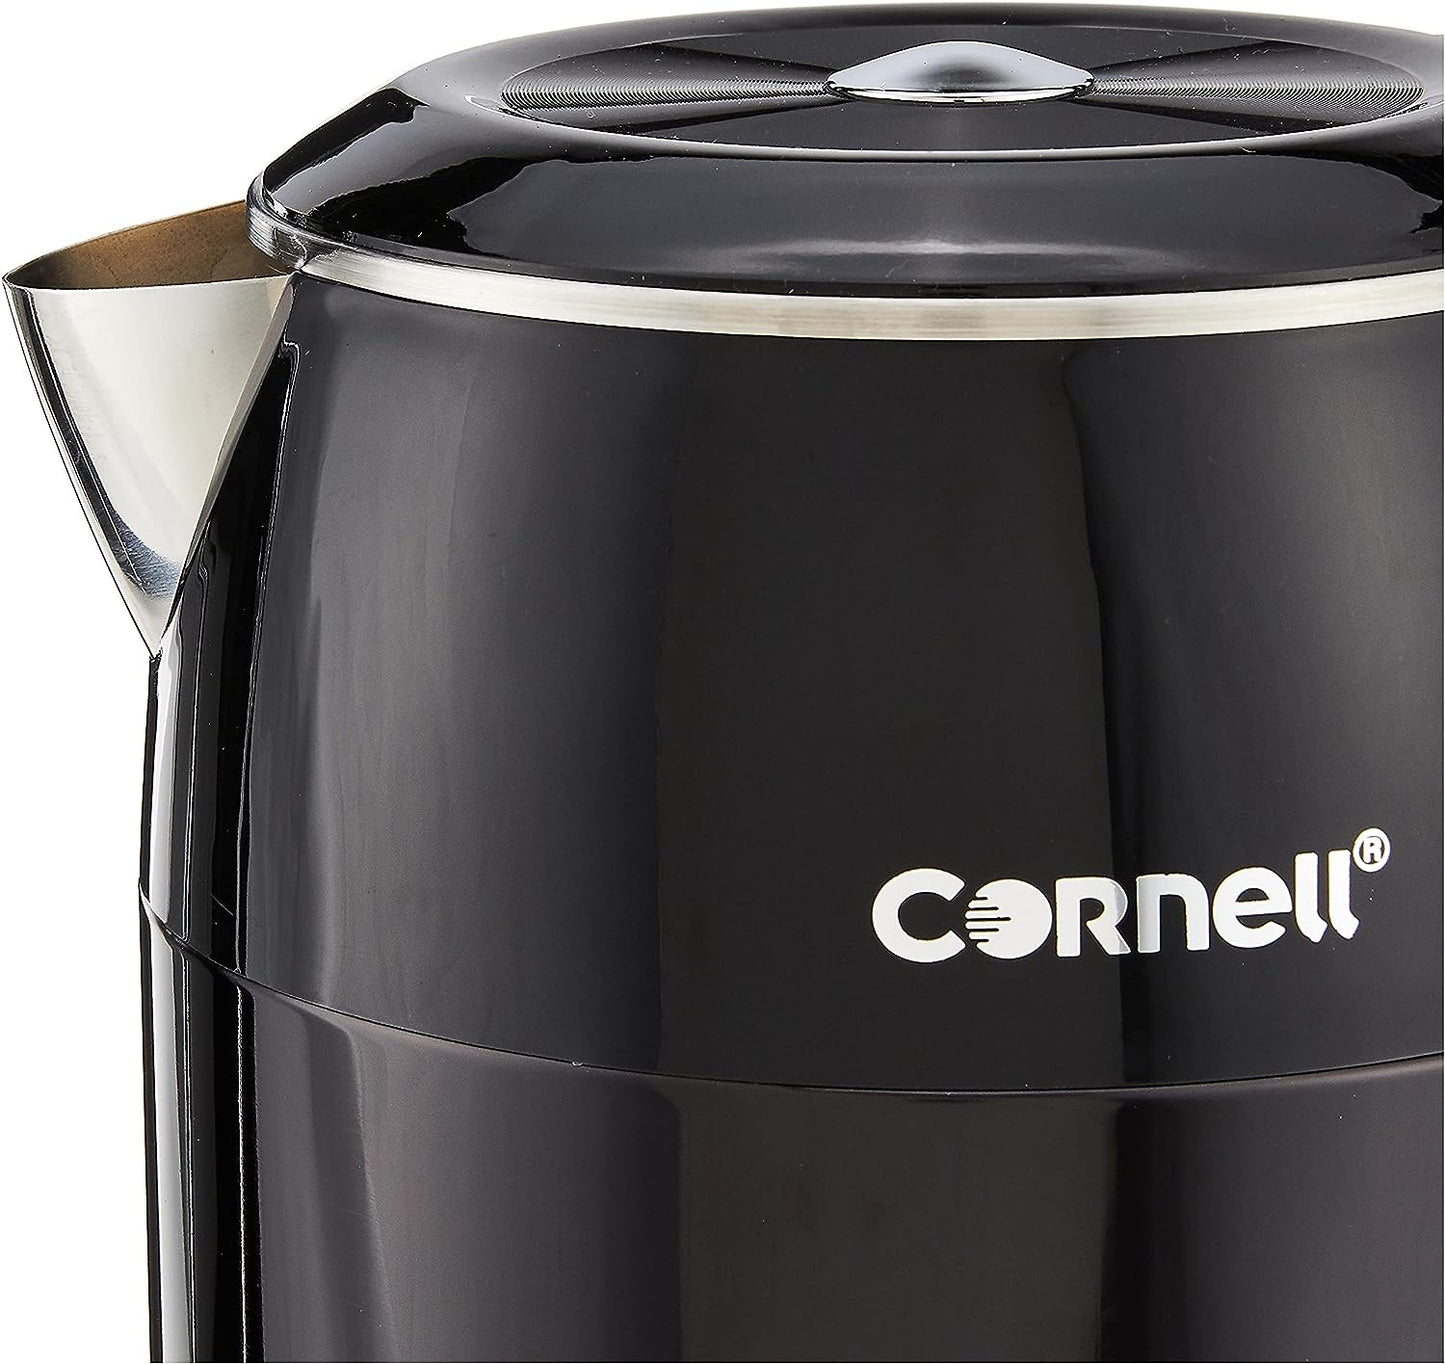 Cornell CJKP182SSB Cool Touch Double Wall Cordless Kettle 1.8L